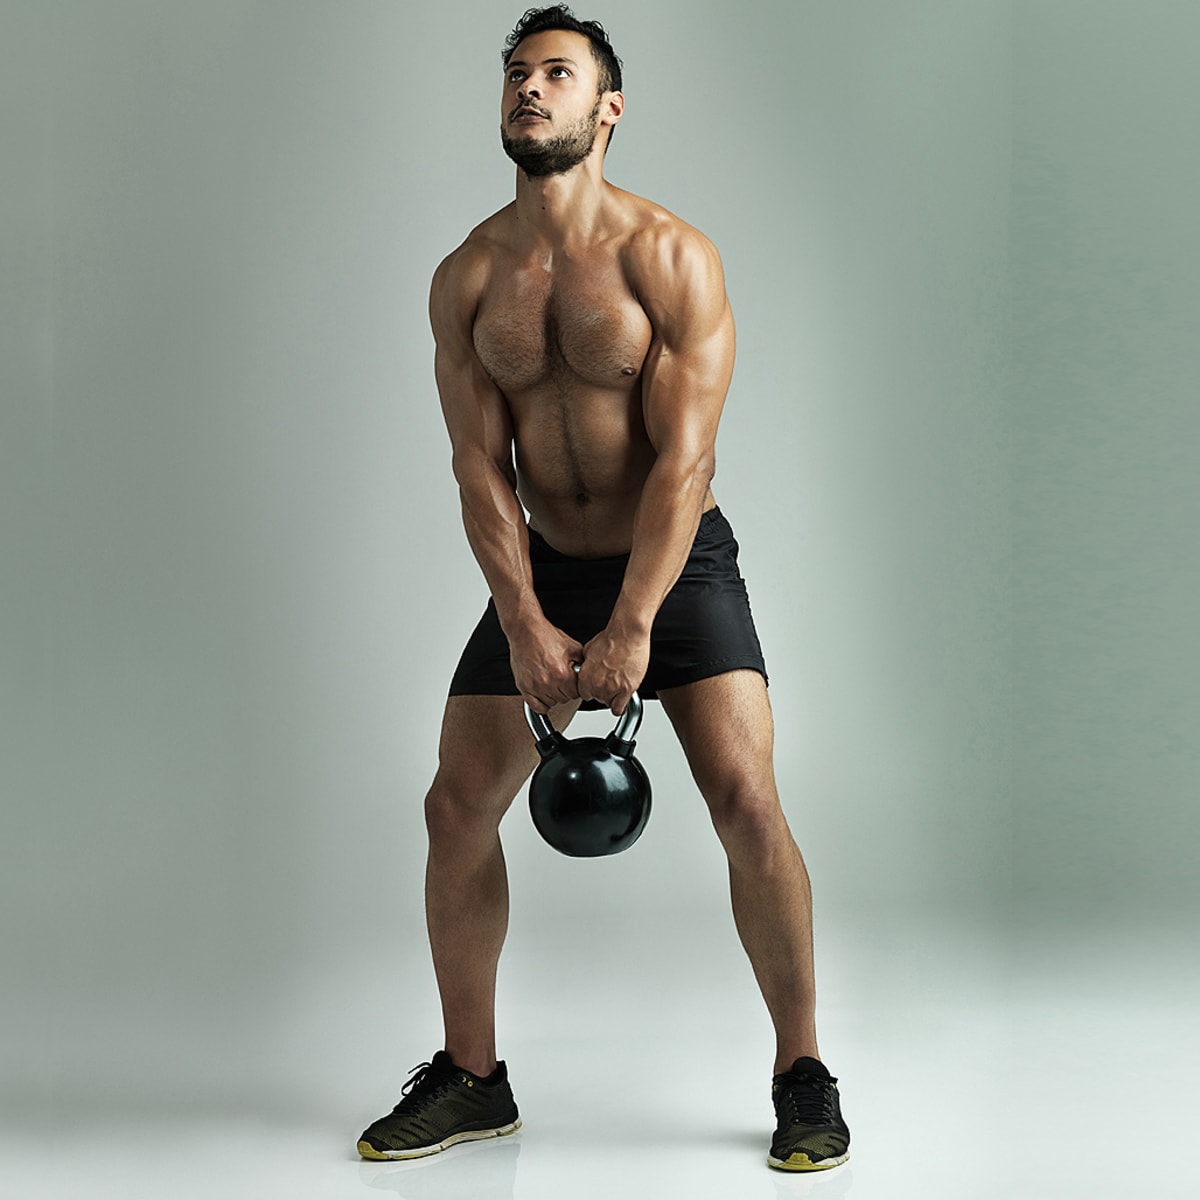 10 Kettlebell Workouts To Build